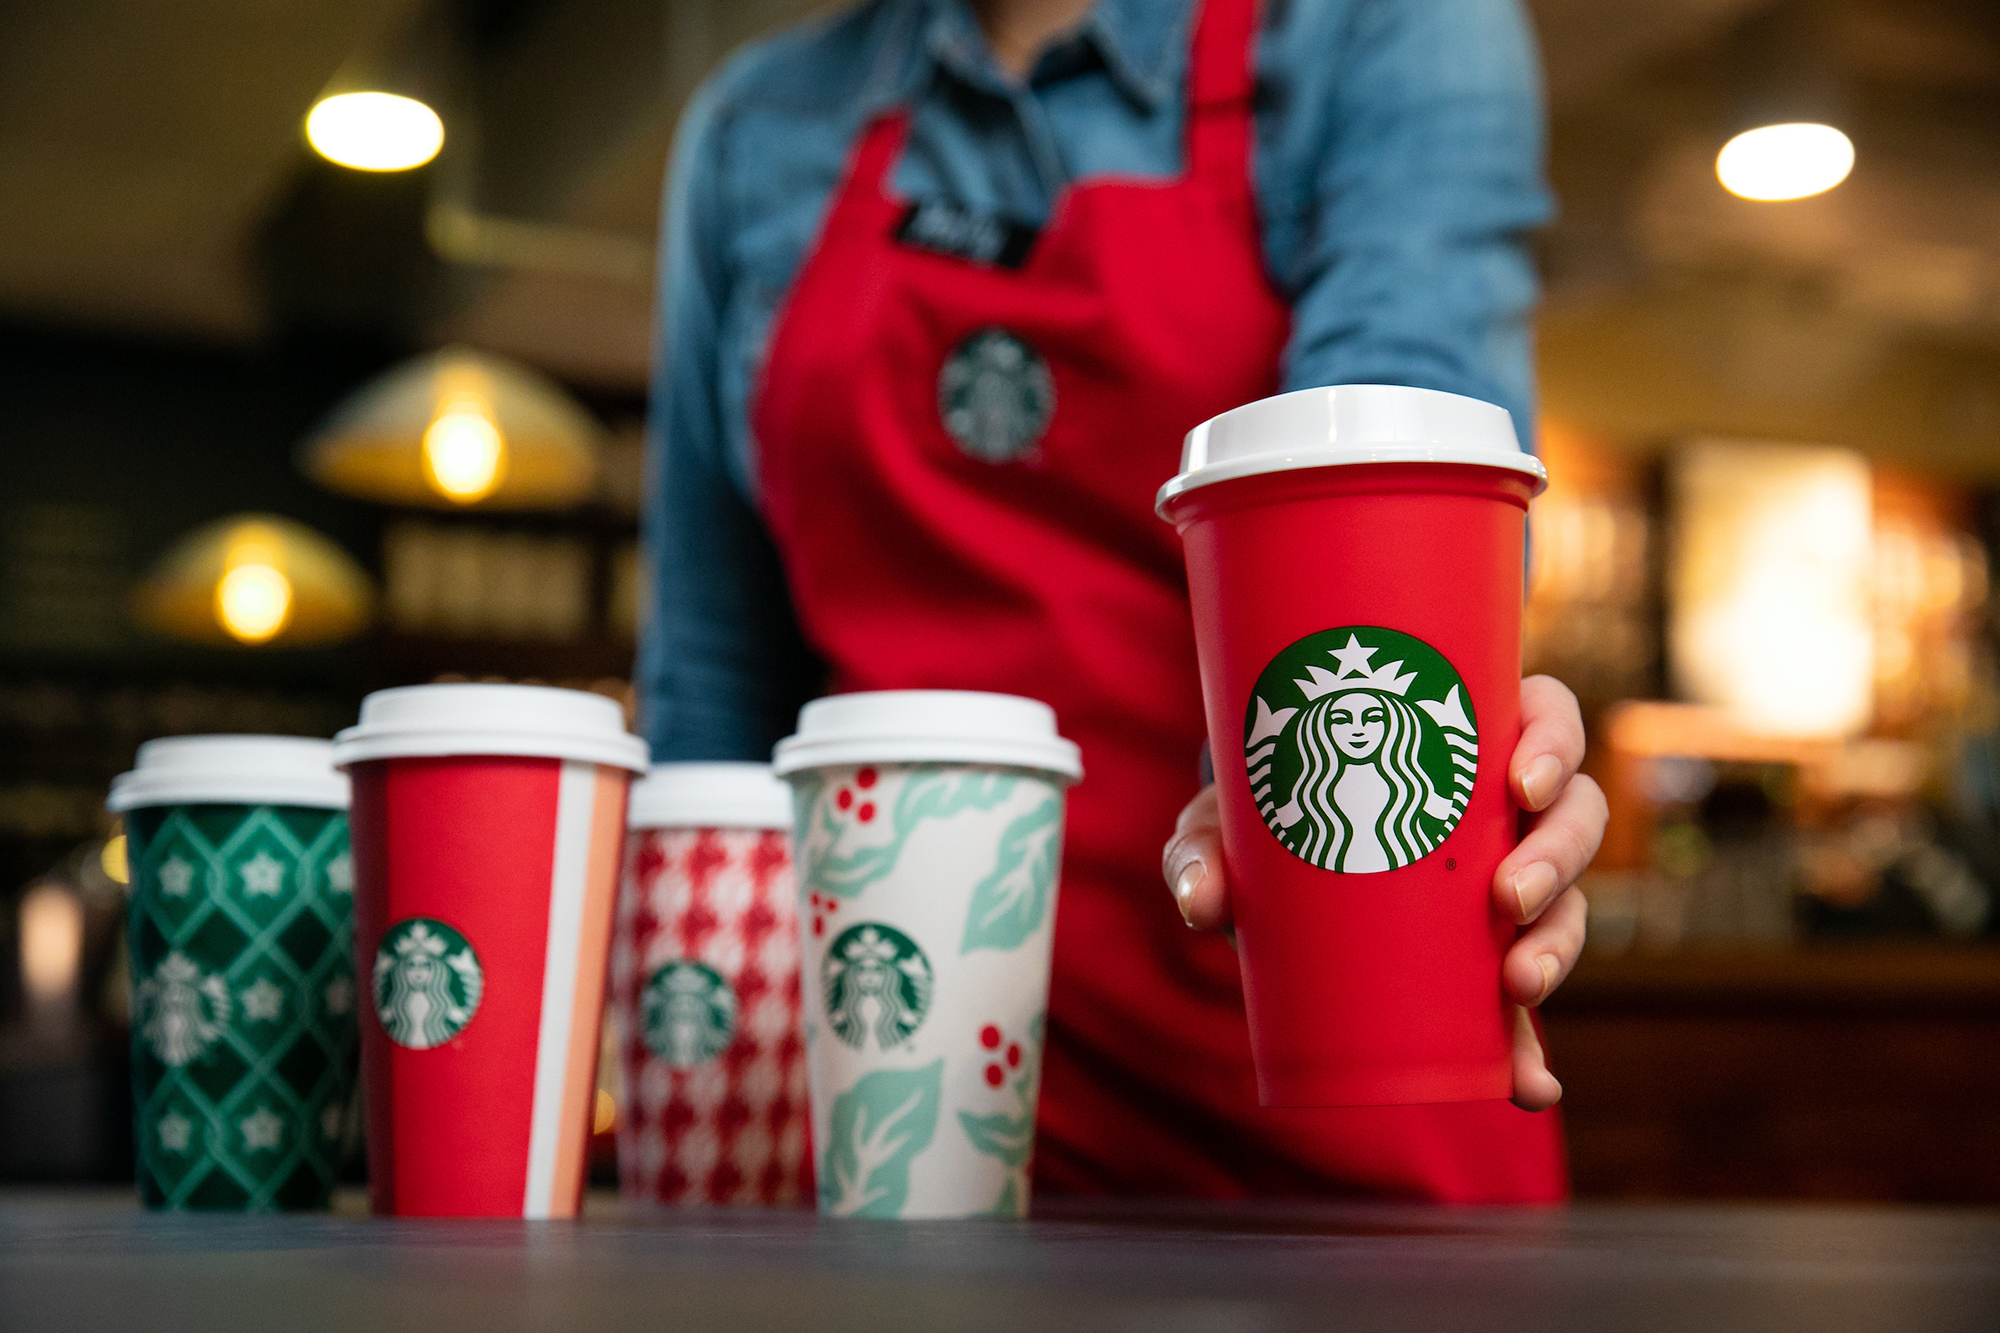 https://www.usmagazine.com/wp-content/uploads/2018/11/starbucks-re-usable-holiday-cups.jpg?quality=86&strip=all